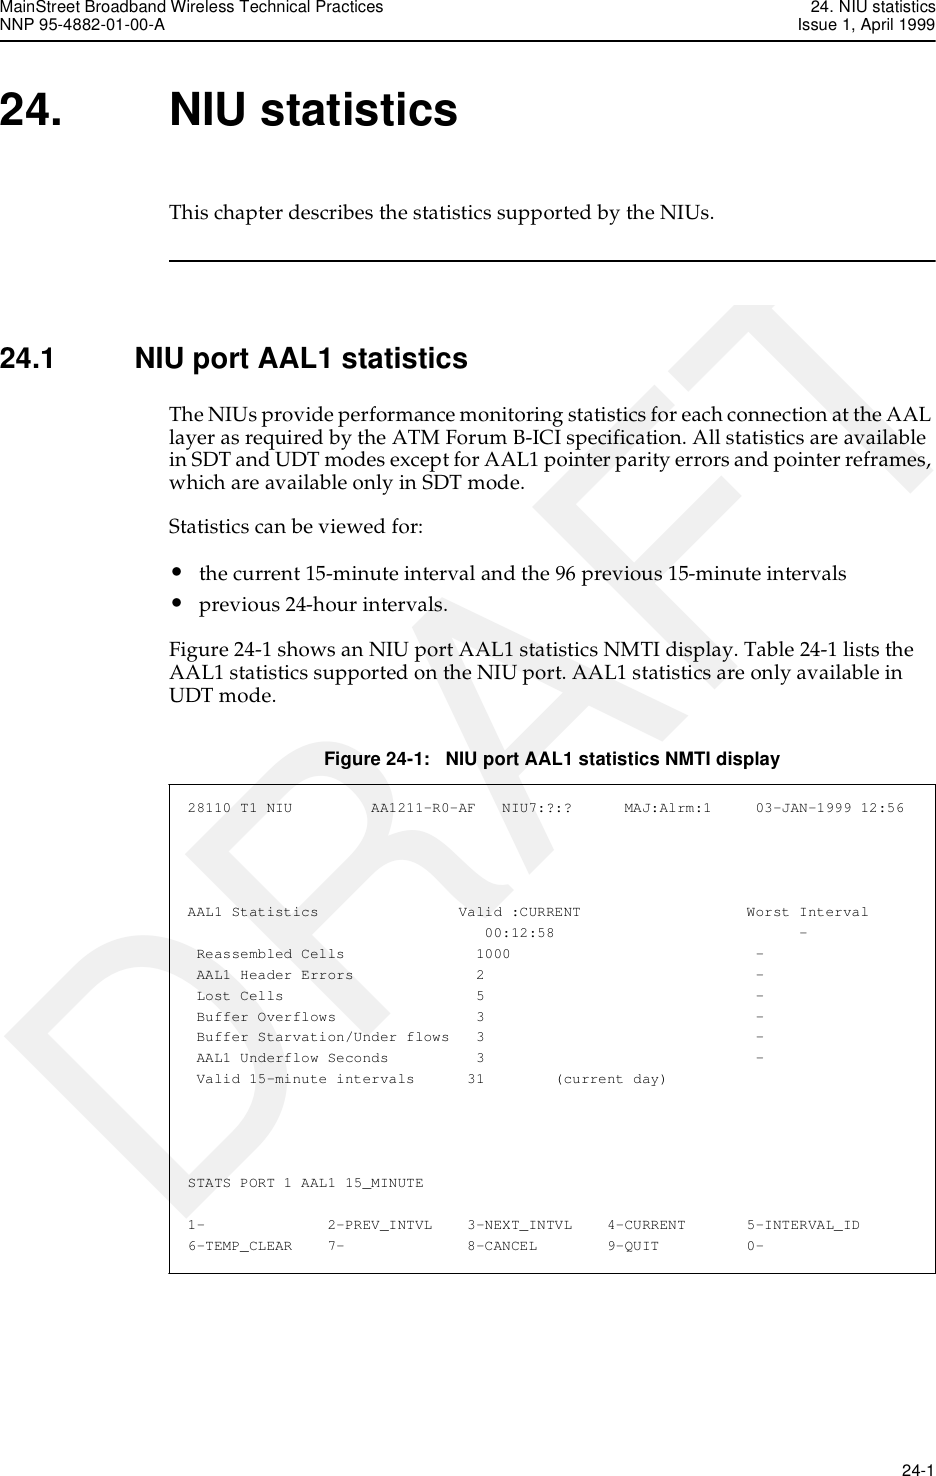 MainStreet Broadband Wireless Technical Practices 24. NIU statisticsNNP 95-4882-01-00-A Issue 1, April 1999   24-1DRAFT24. NIU statisticsThis chapter describes the statistics supported by the NIUs. 24.1 NIU port AAL1 statisticsThe NIUs provide performance monitoring statistics for each connection at the AAL layer as required by the ATM Forum B-ICI specification. All statistics are available in SDT and UDT modes except for AAL1 pointer parity errors and pointer reframes, which are available only in SDT mode.Statistics can be viewed for:•the current 15-minute interval and the 96 previous 15-minute intervals•previous 24-hour intervals.Figure 24-1 shows an NIU port AAL1 statistics NMTI display. Table 24-1 lists the AAL1 statistics supported on the NIU port. AAL1 statistics are only available in UDT mode.Figure 24-1:   NIU port AAL1 statistics NMTI display28110 T1 NIU         AA1211-R0-AF   NIU7:?:?      MAJ:Alrm:1     03-JAN-1999 12:56AAL1 Statistics                Valid :CURRENT                   Worst Interval                                  00:12:58                            - Reassembled Cells               1000                            - AAL1 Header Errors              2                               - Lost Cells                      5                               - Buffer Overflows                3                               - Buffer Starvation/Under flows   3                               - AAL1 Underflow Seconds          3                               - Valid 15-minute intervals      31        (current day)STATS PORT 1 AAL1 15_MINUTE1-              2-PREV_INTVL    3-NEXT_INTVL    4-CURRENT       5-INTERVAL_ID6-TEMP_CLEAR    7-              8-CANCEL        9-QUIT          0-